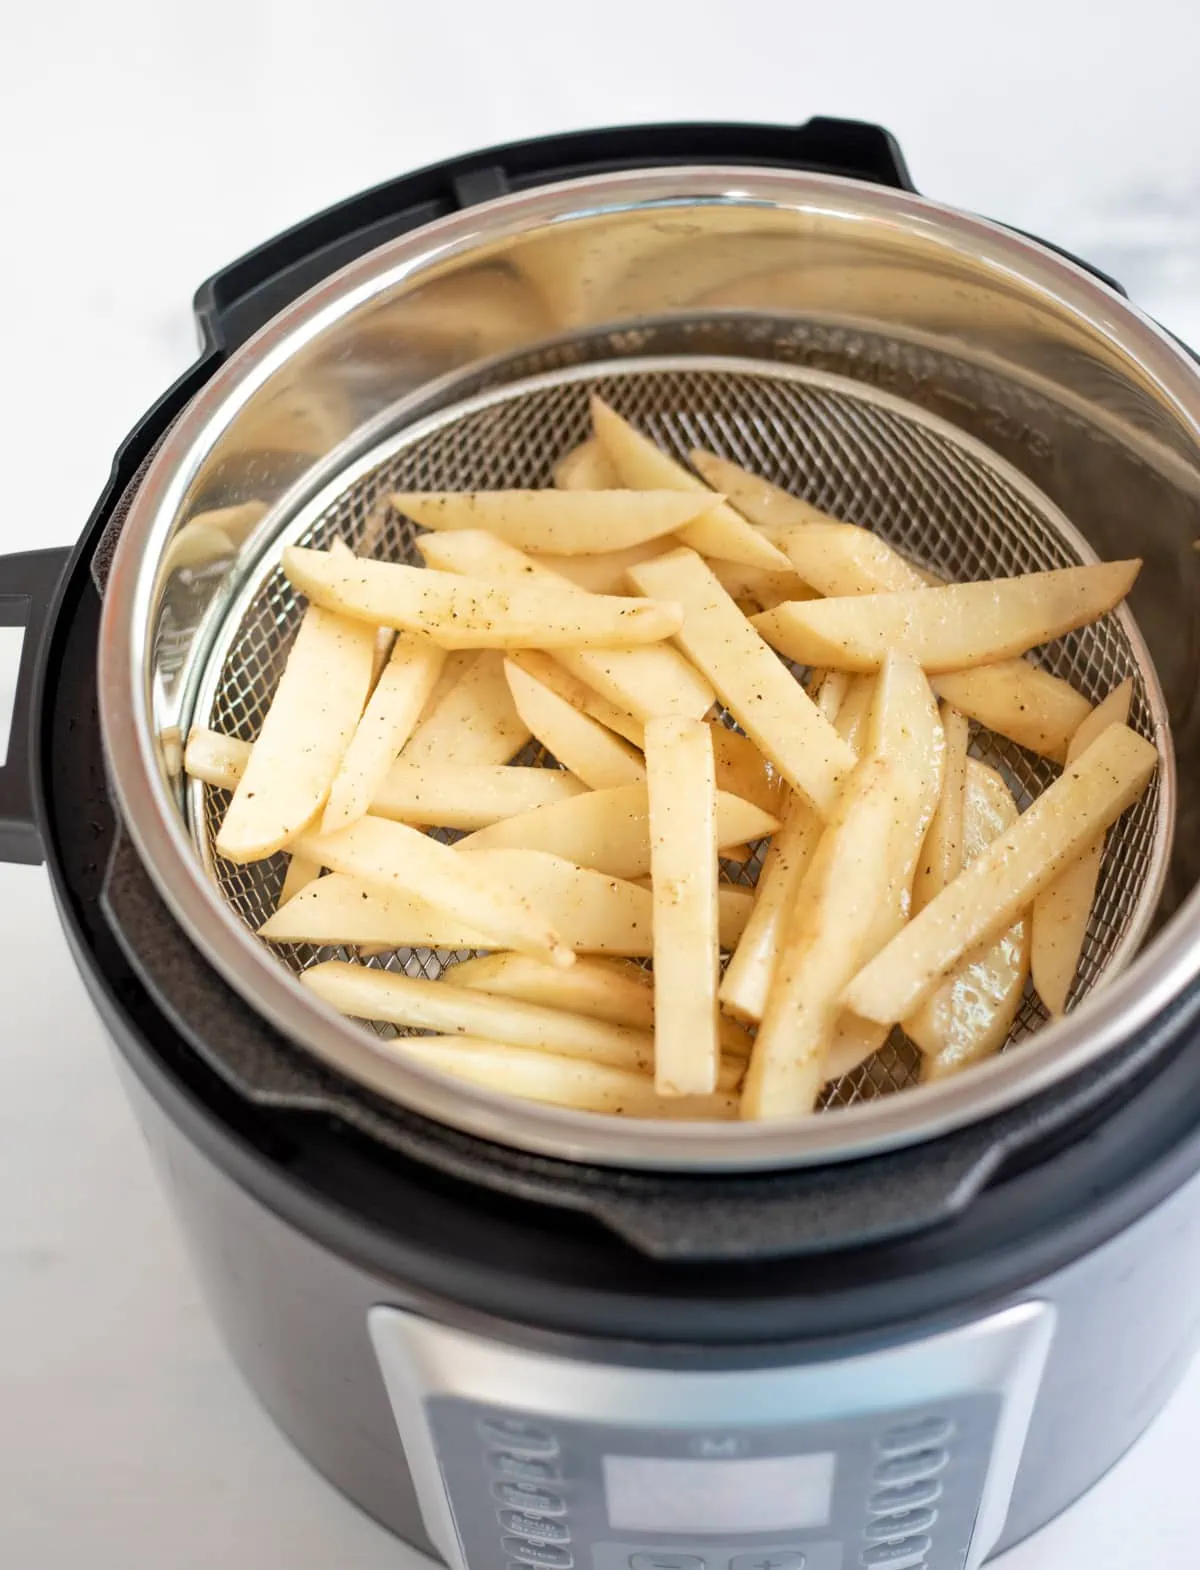 potato sticks in the instant pot to make French fries